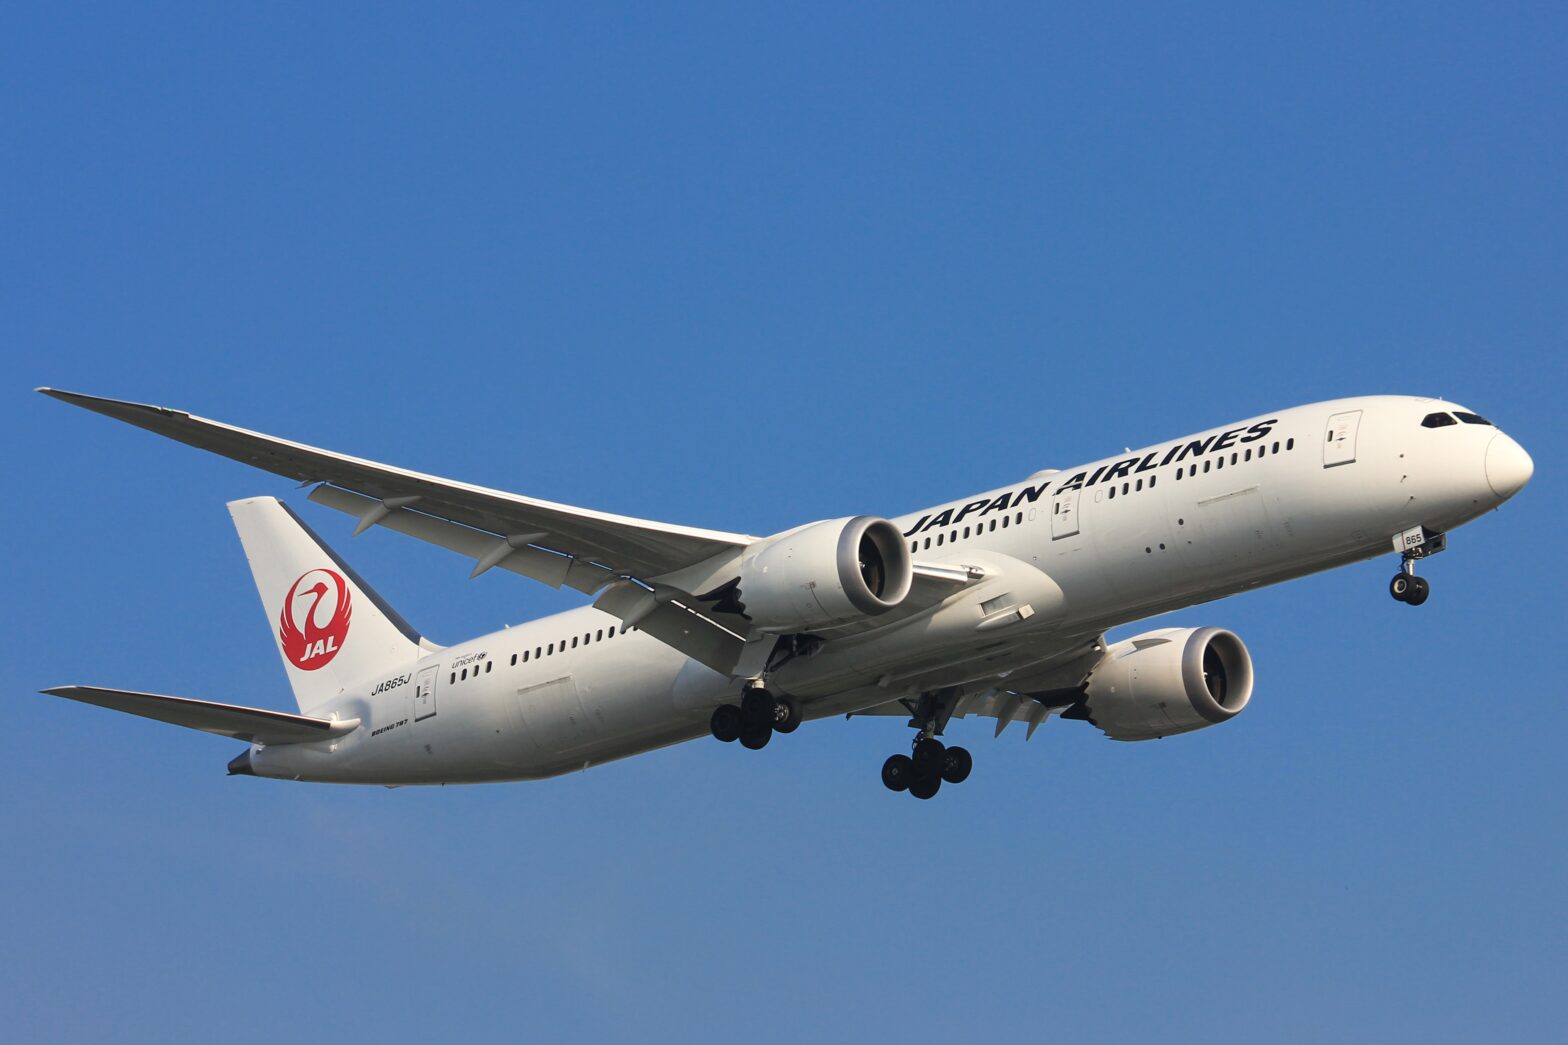 Japan Airlines Enables Environmentally Responsible Travel With Clothing Rentals